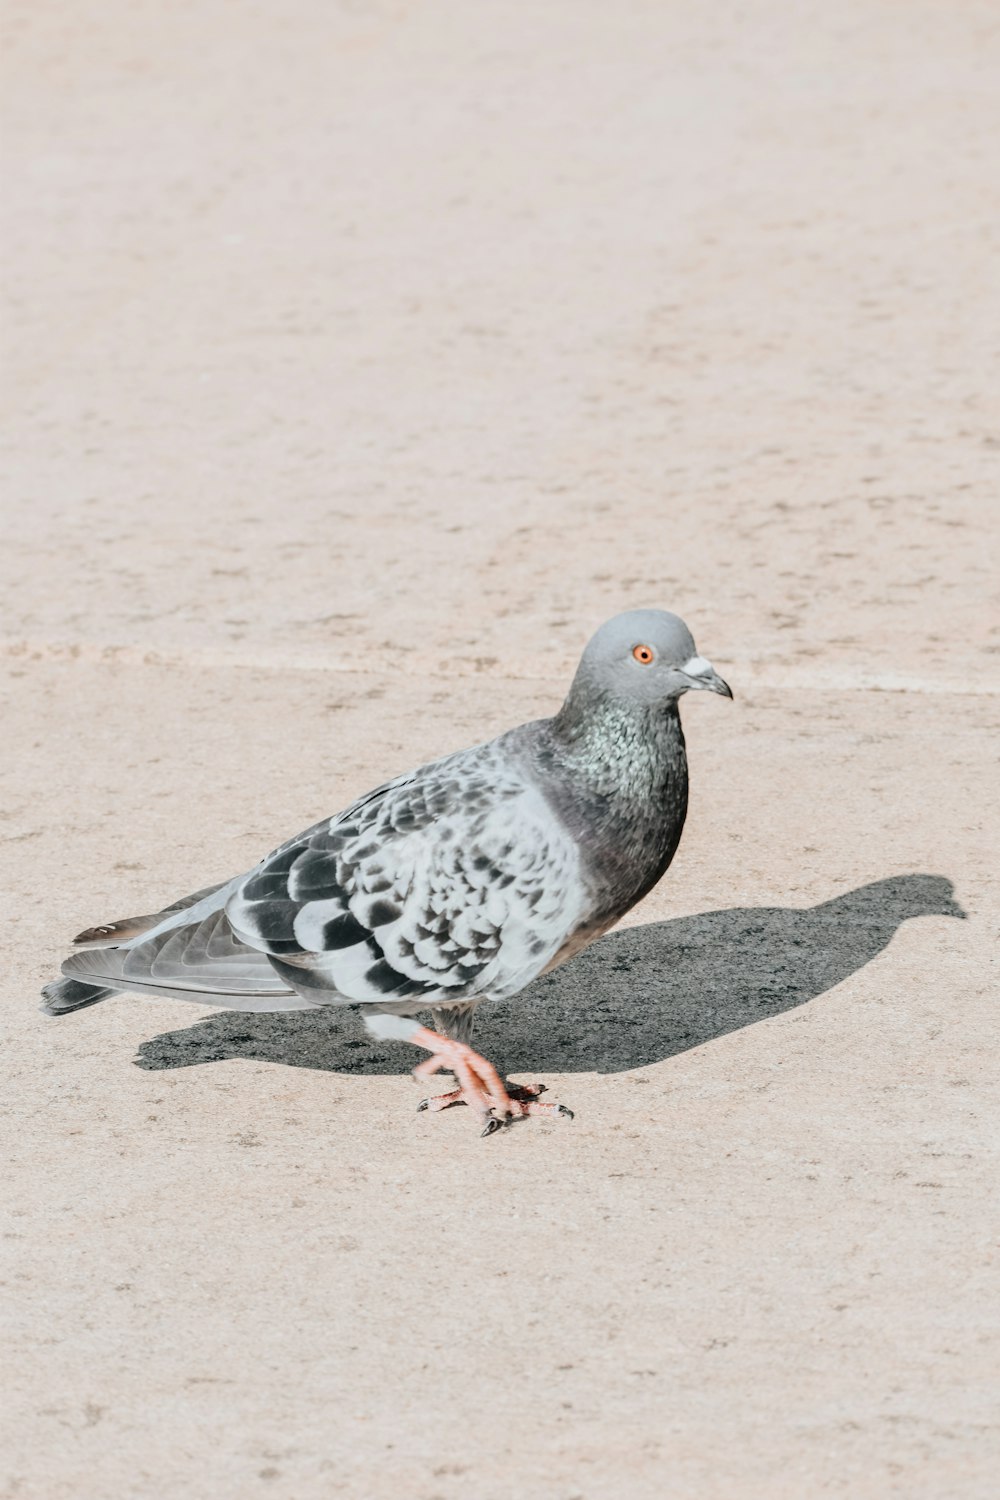 a gray and white bird standing on top of a sandy beach